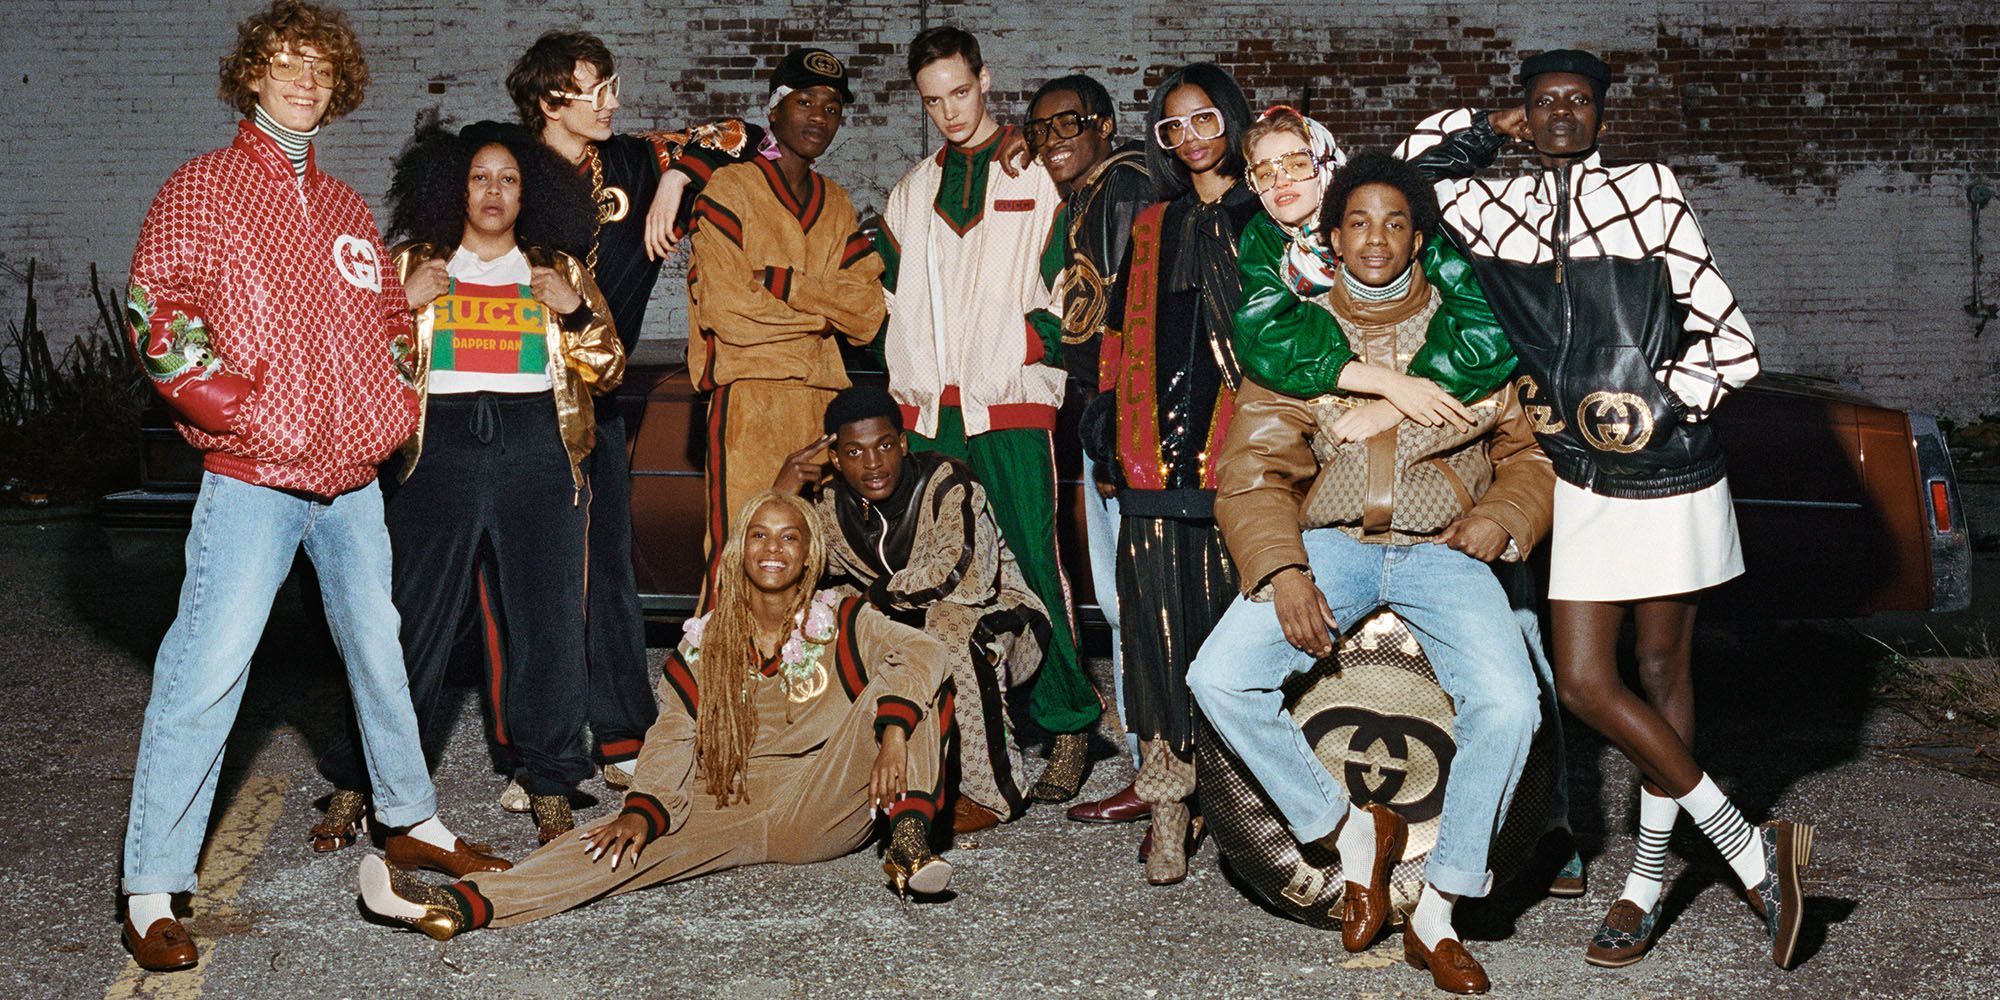 mens trussel rekruttere Working At Gucci: Employee Reviews and Culture